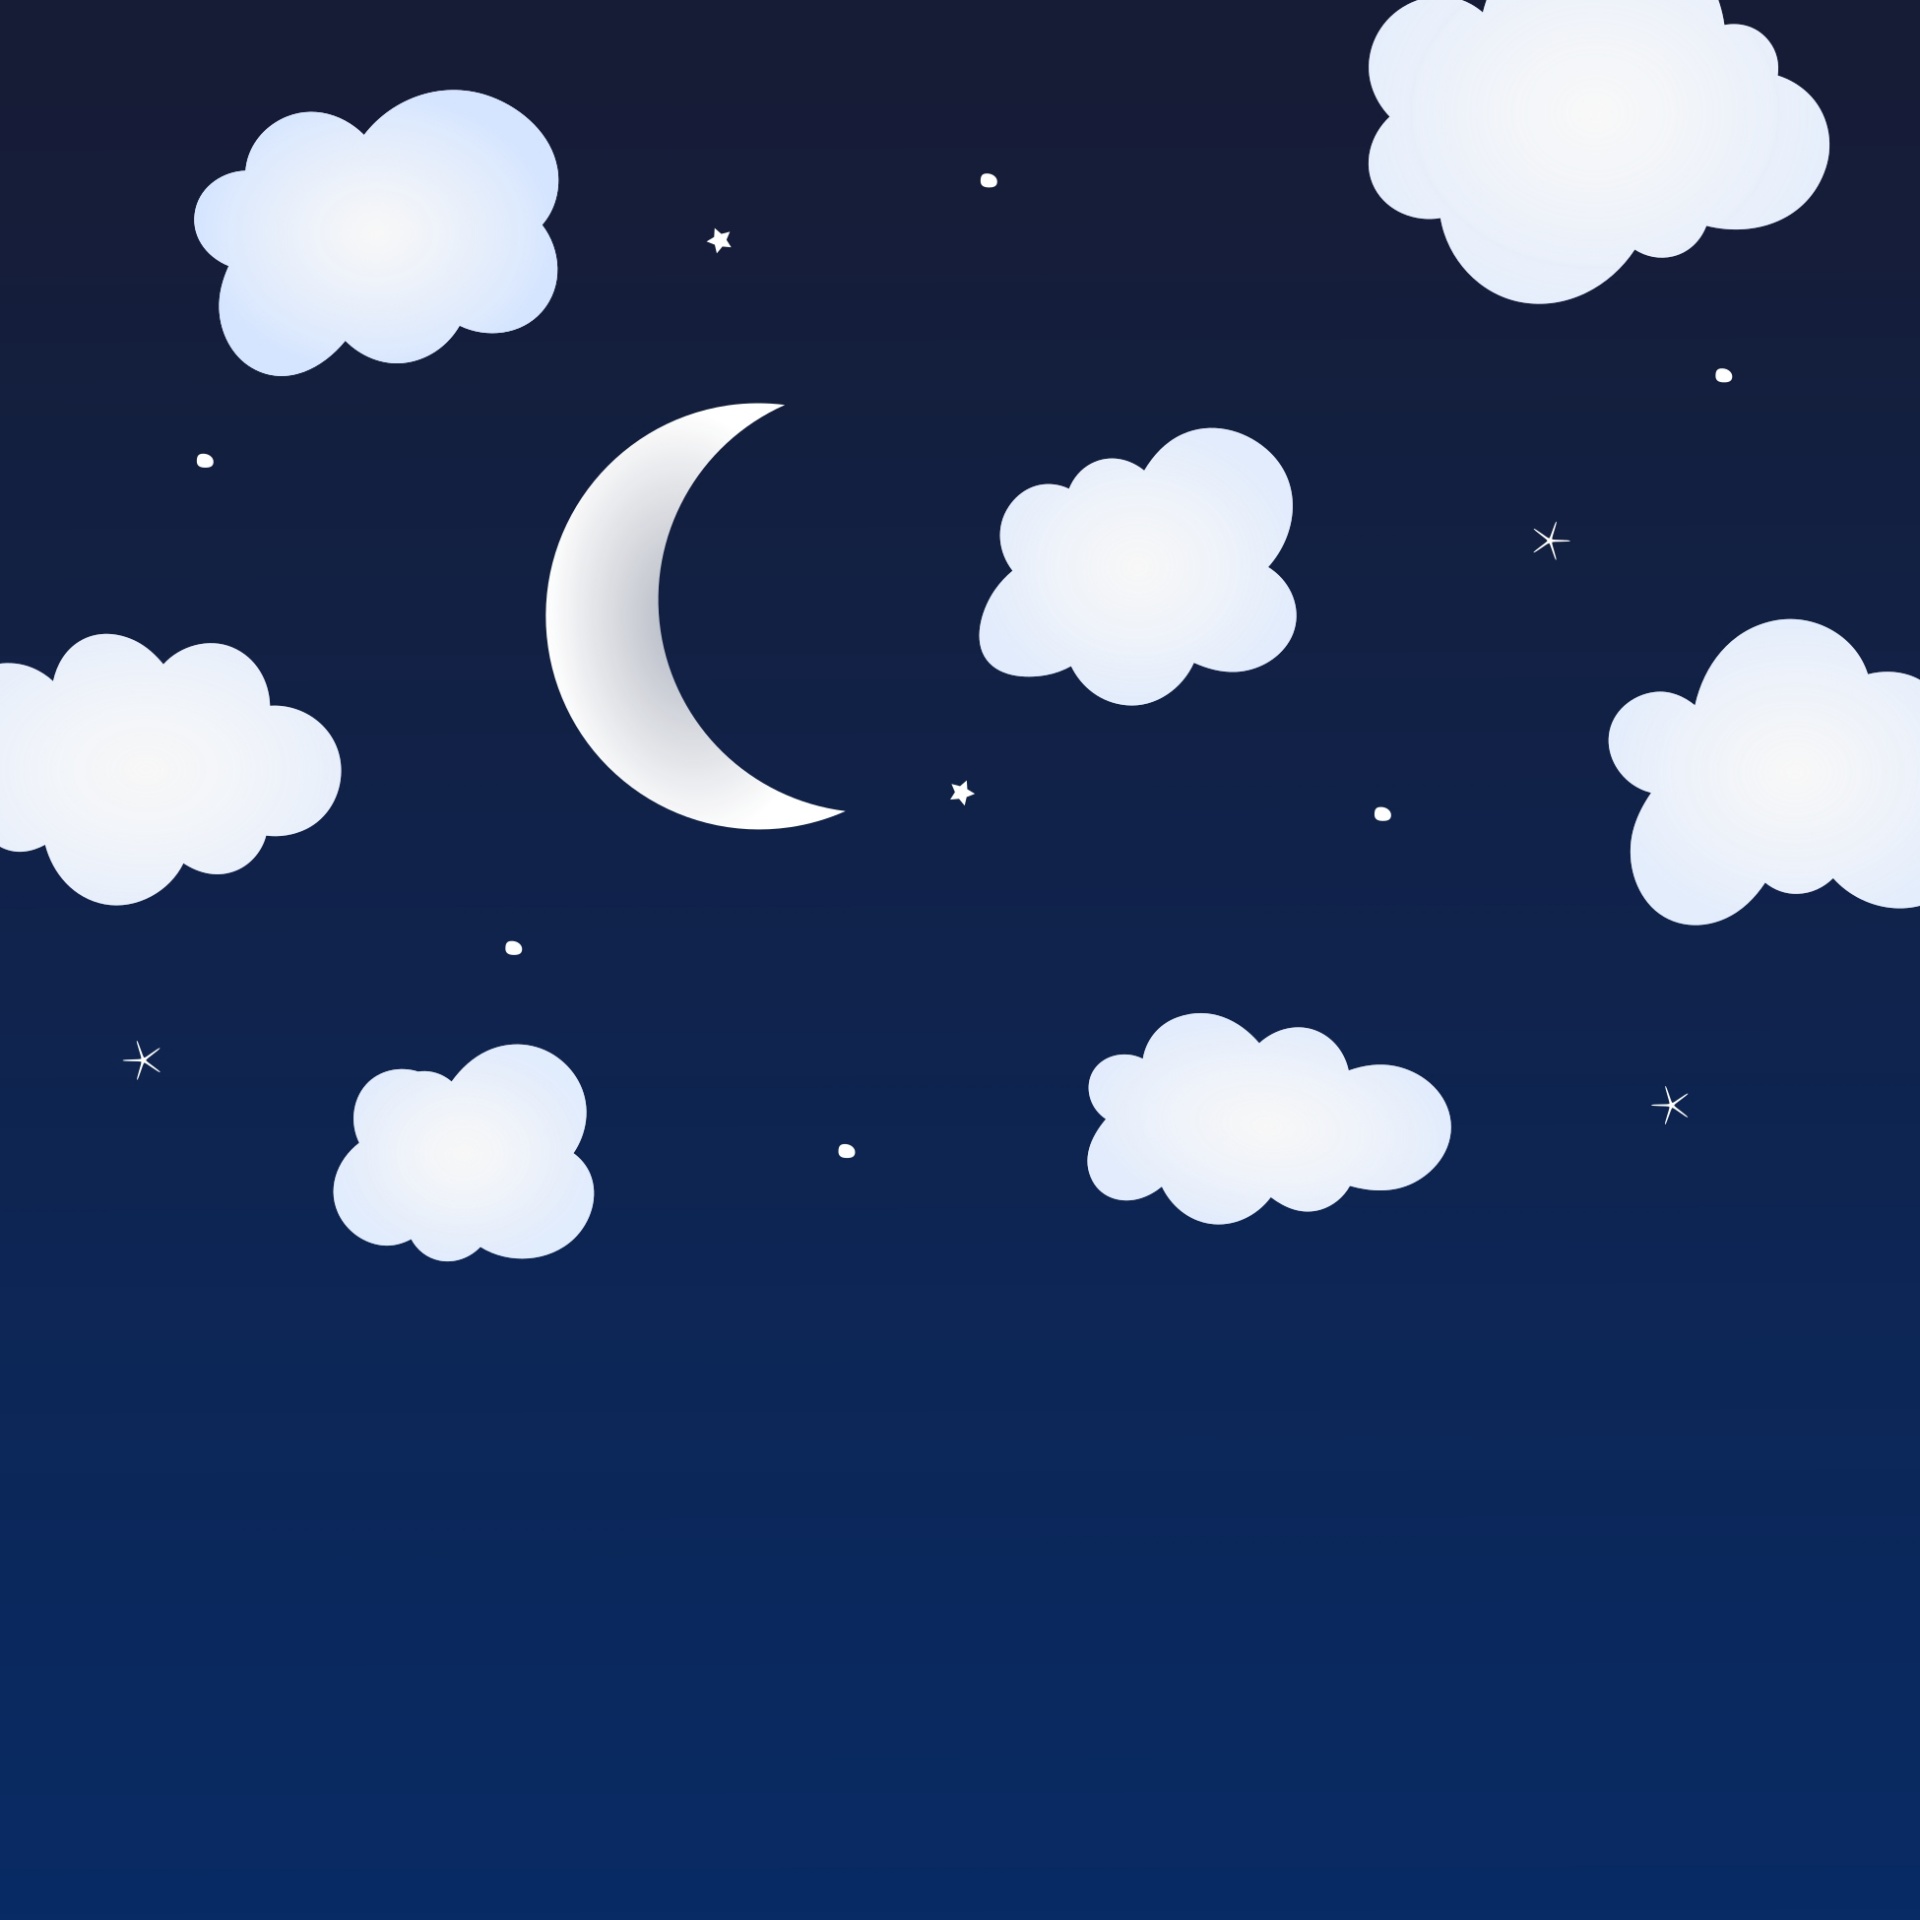 moon clouds background free photo